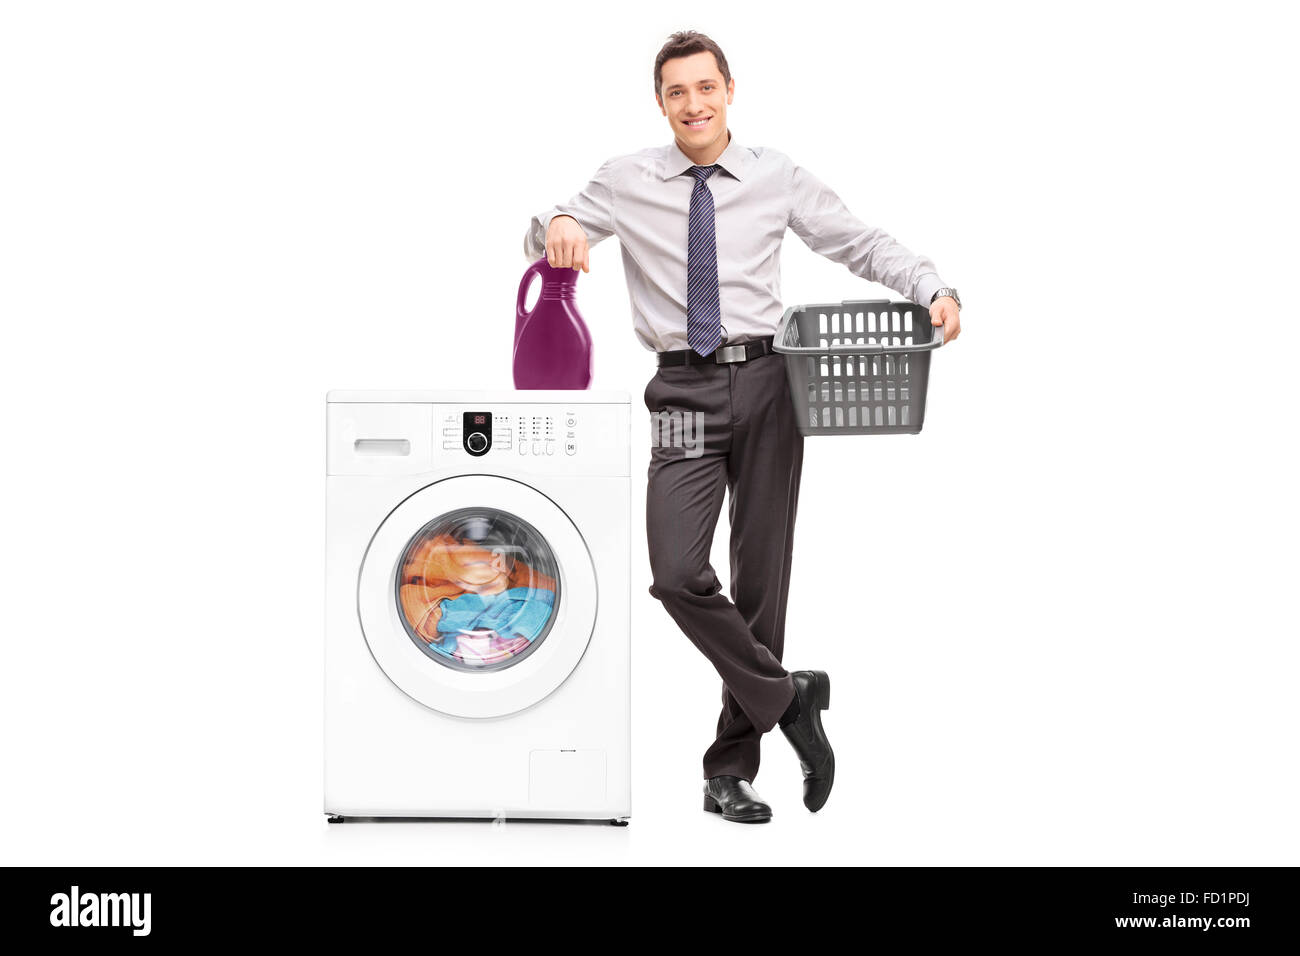 Full length portrait of a young cheerful businessman standing next to a washing machine isolated on white background Stock Photo